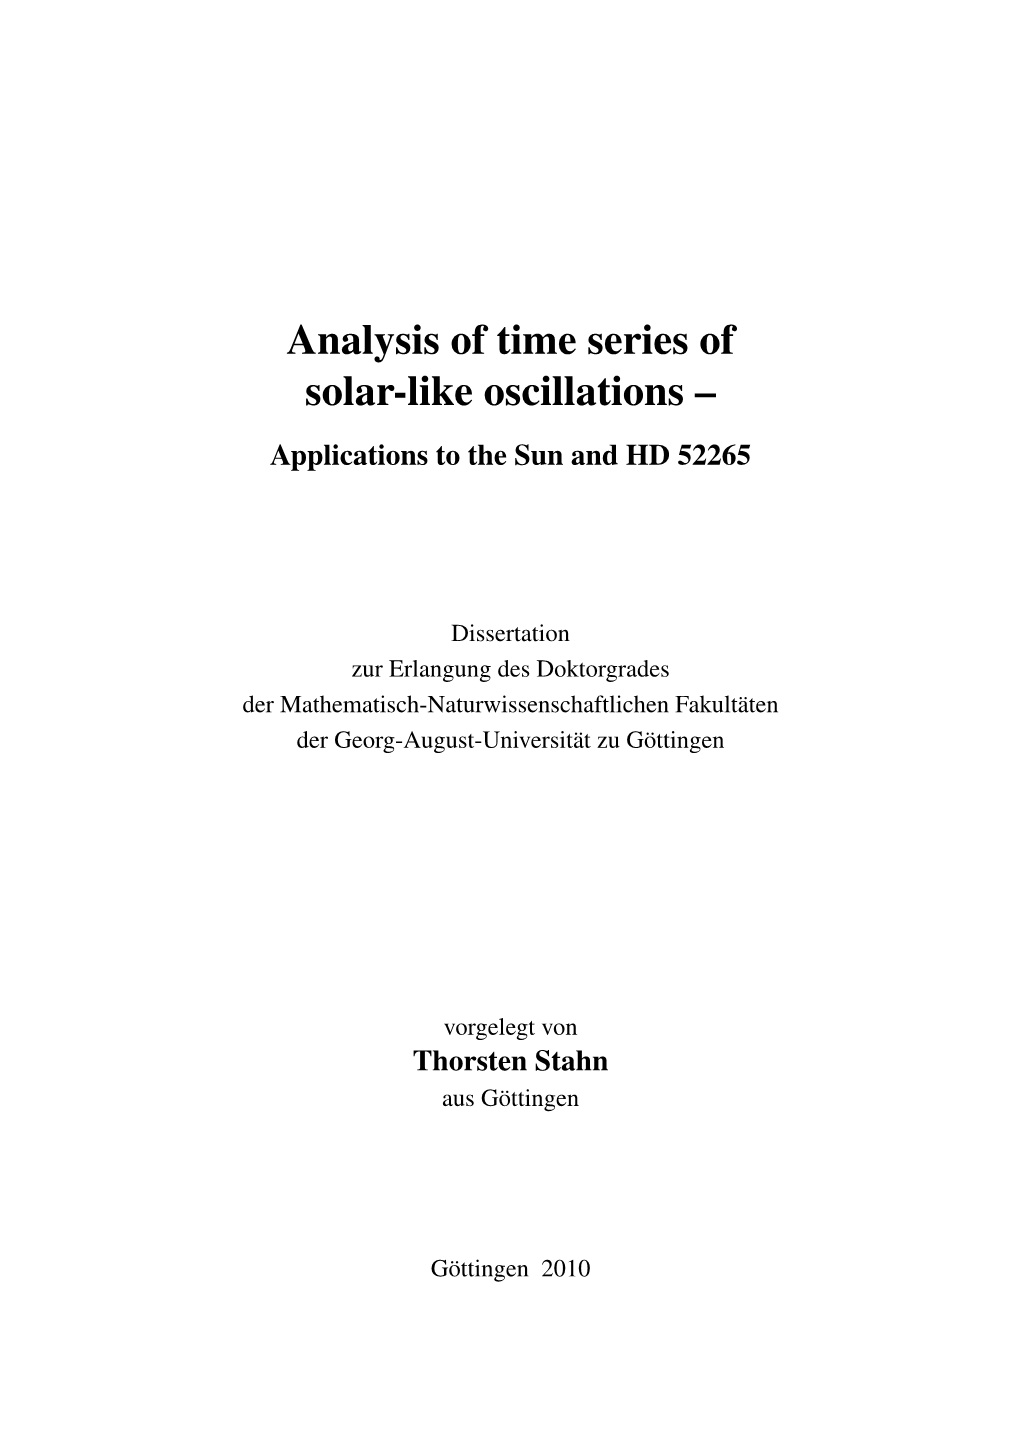 Analysis of Time Series of Solar-Like Oscillations – Applications to the Sun and HD 52265